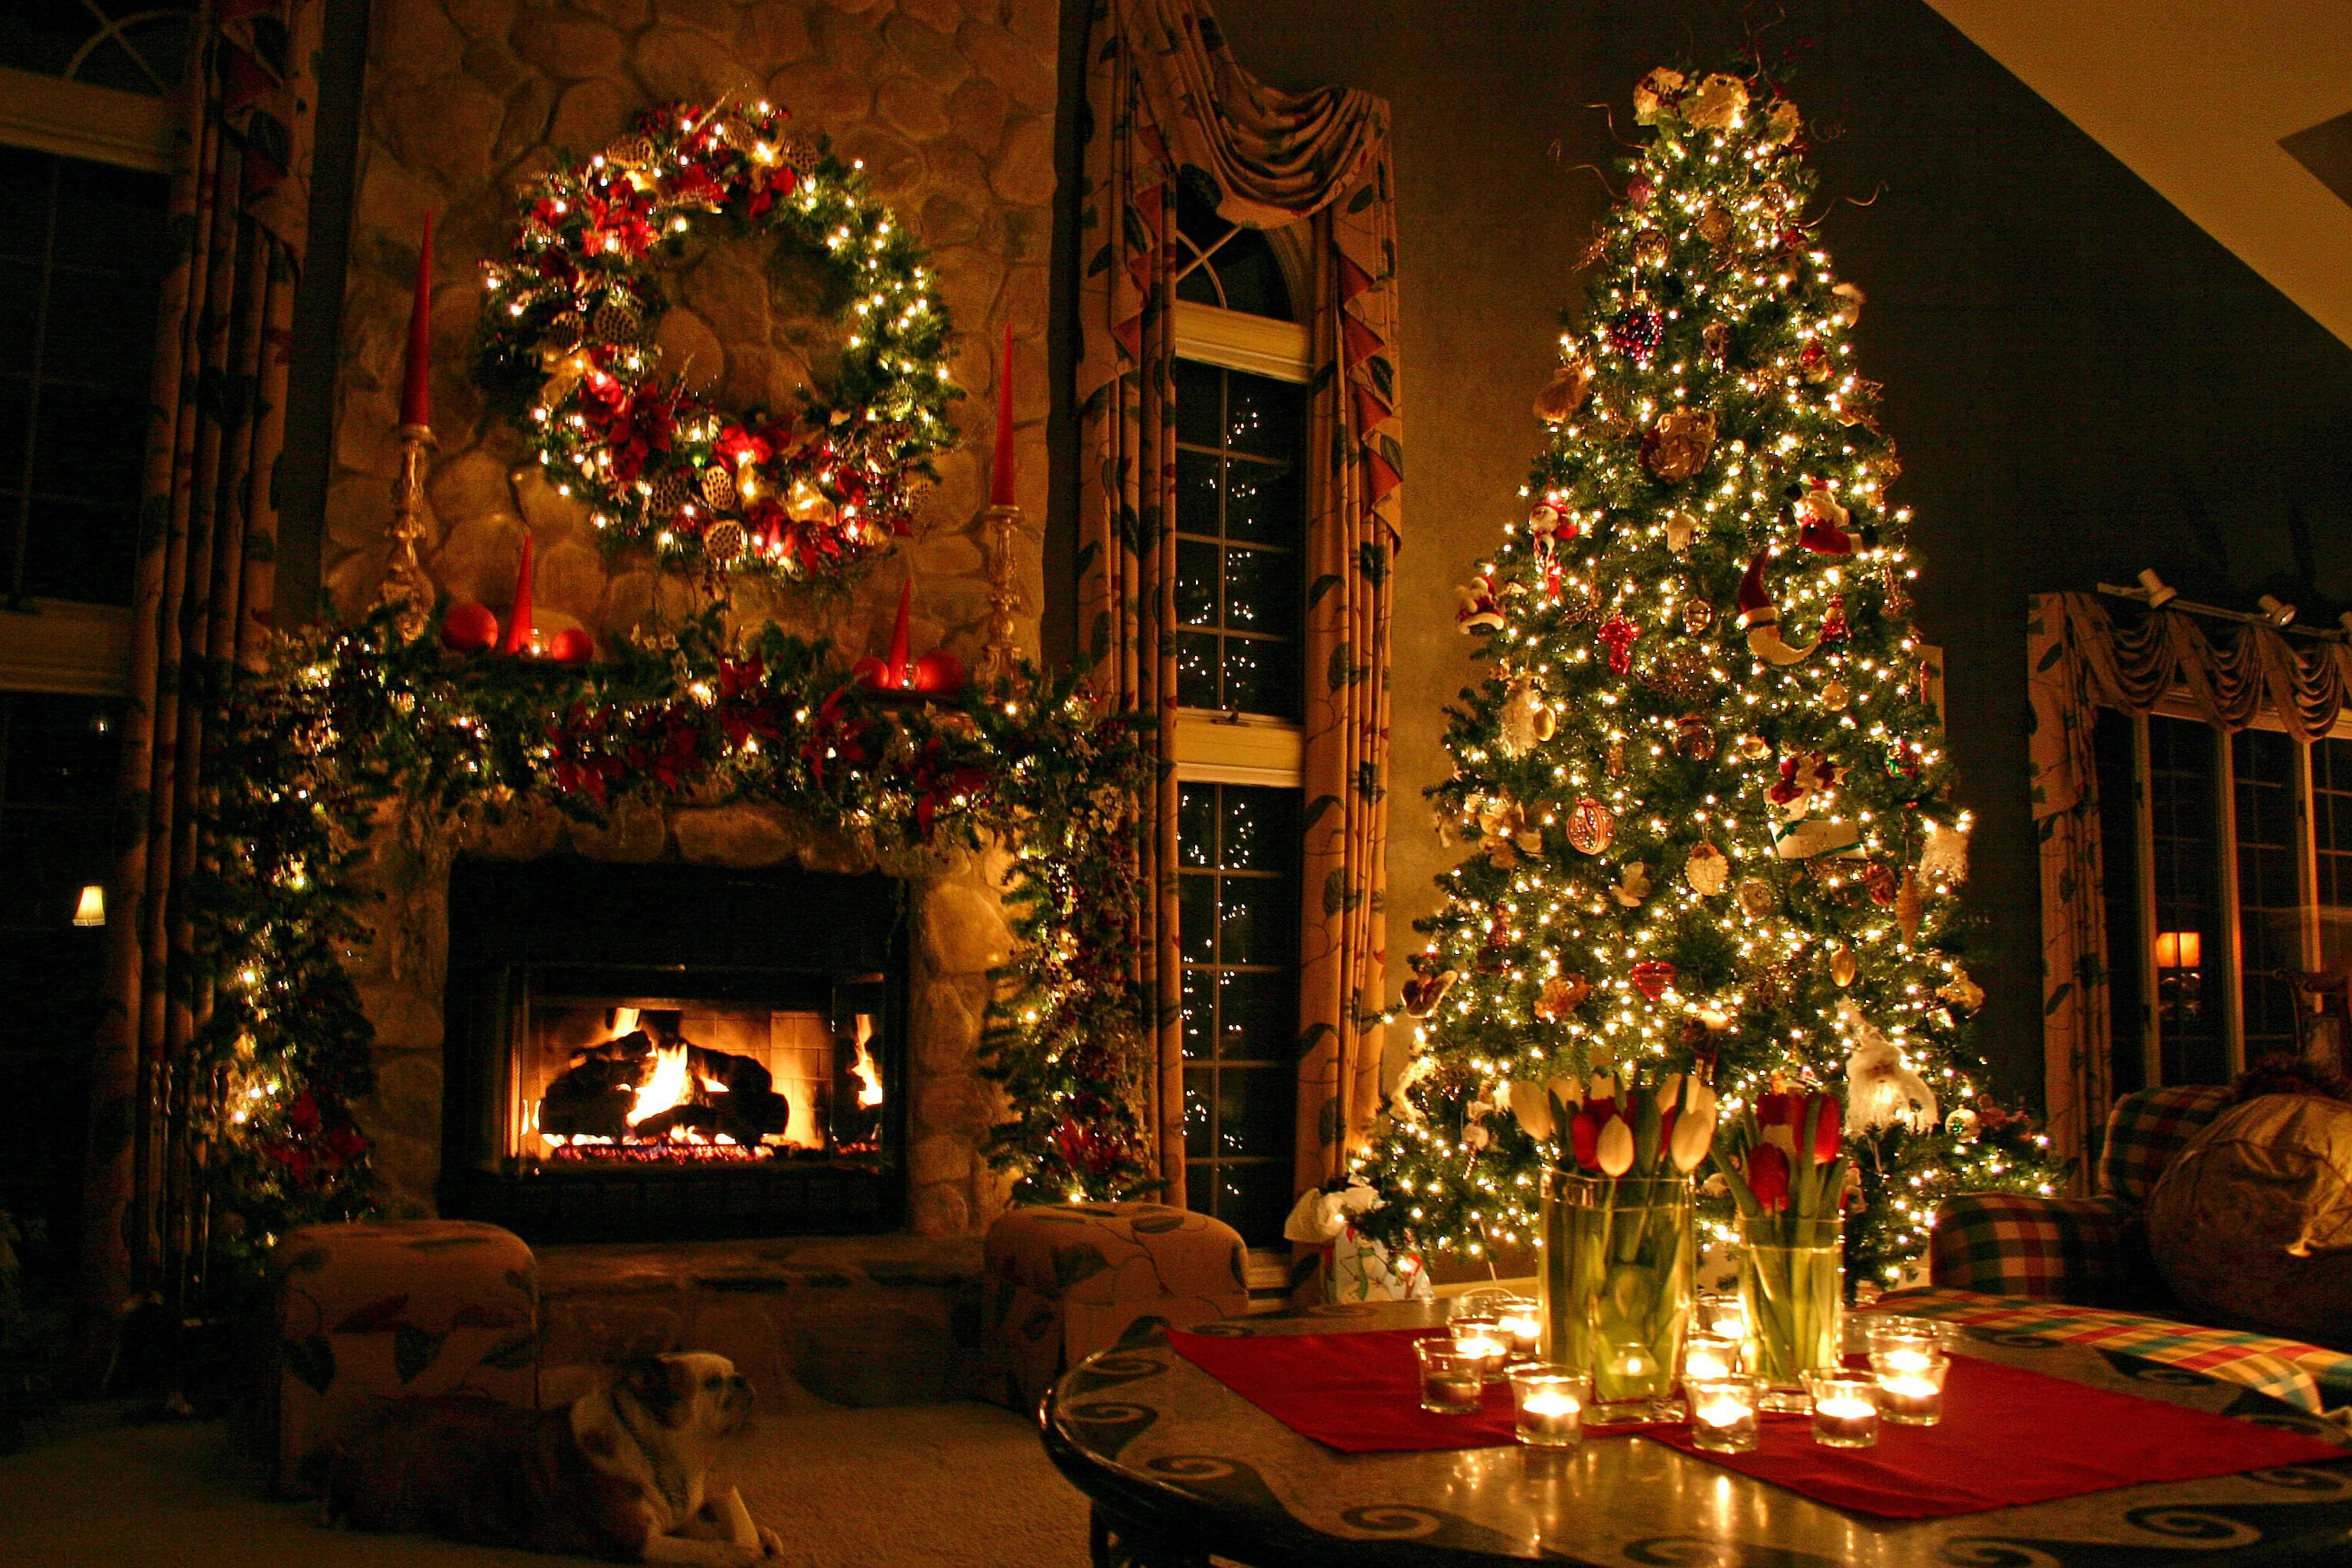 Christmas Fireplace Scenes
 A cozy scene with a beautiful Christmas tree wreath